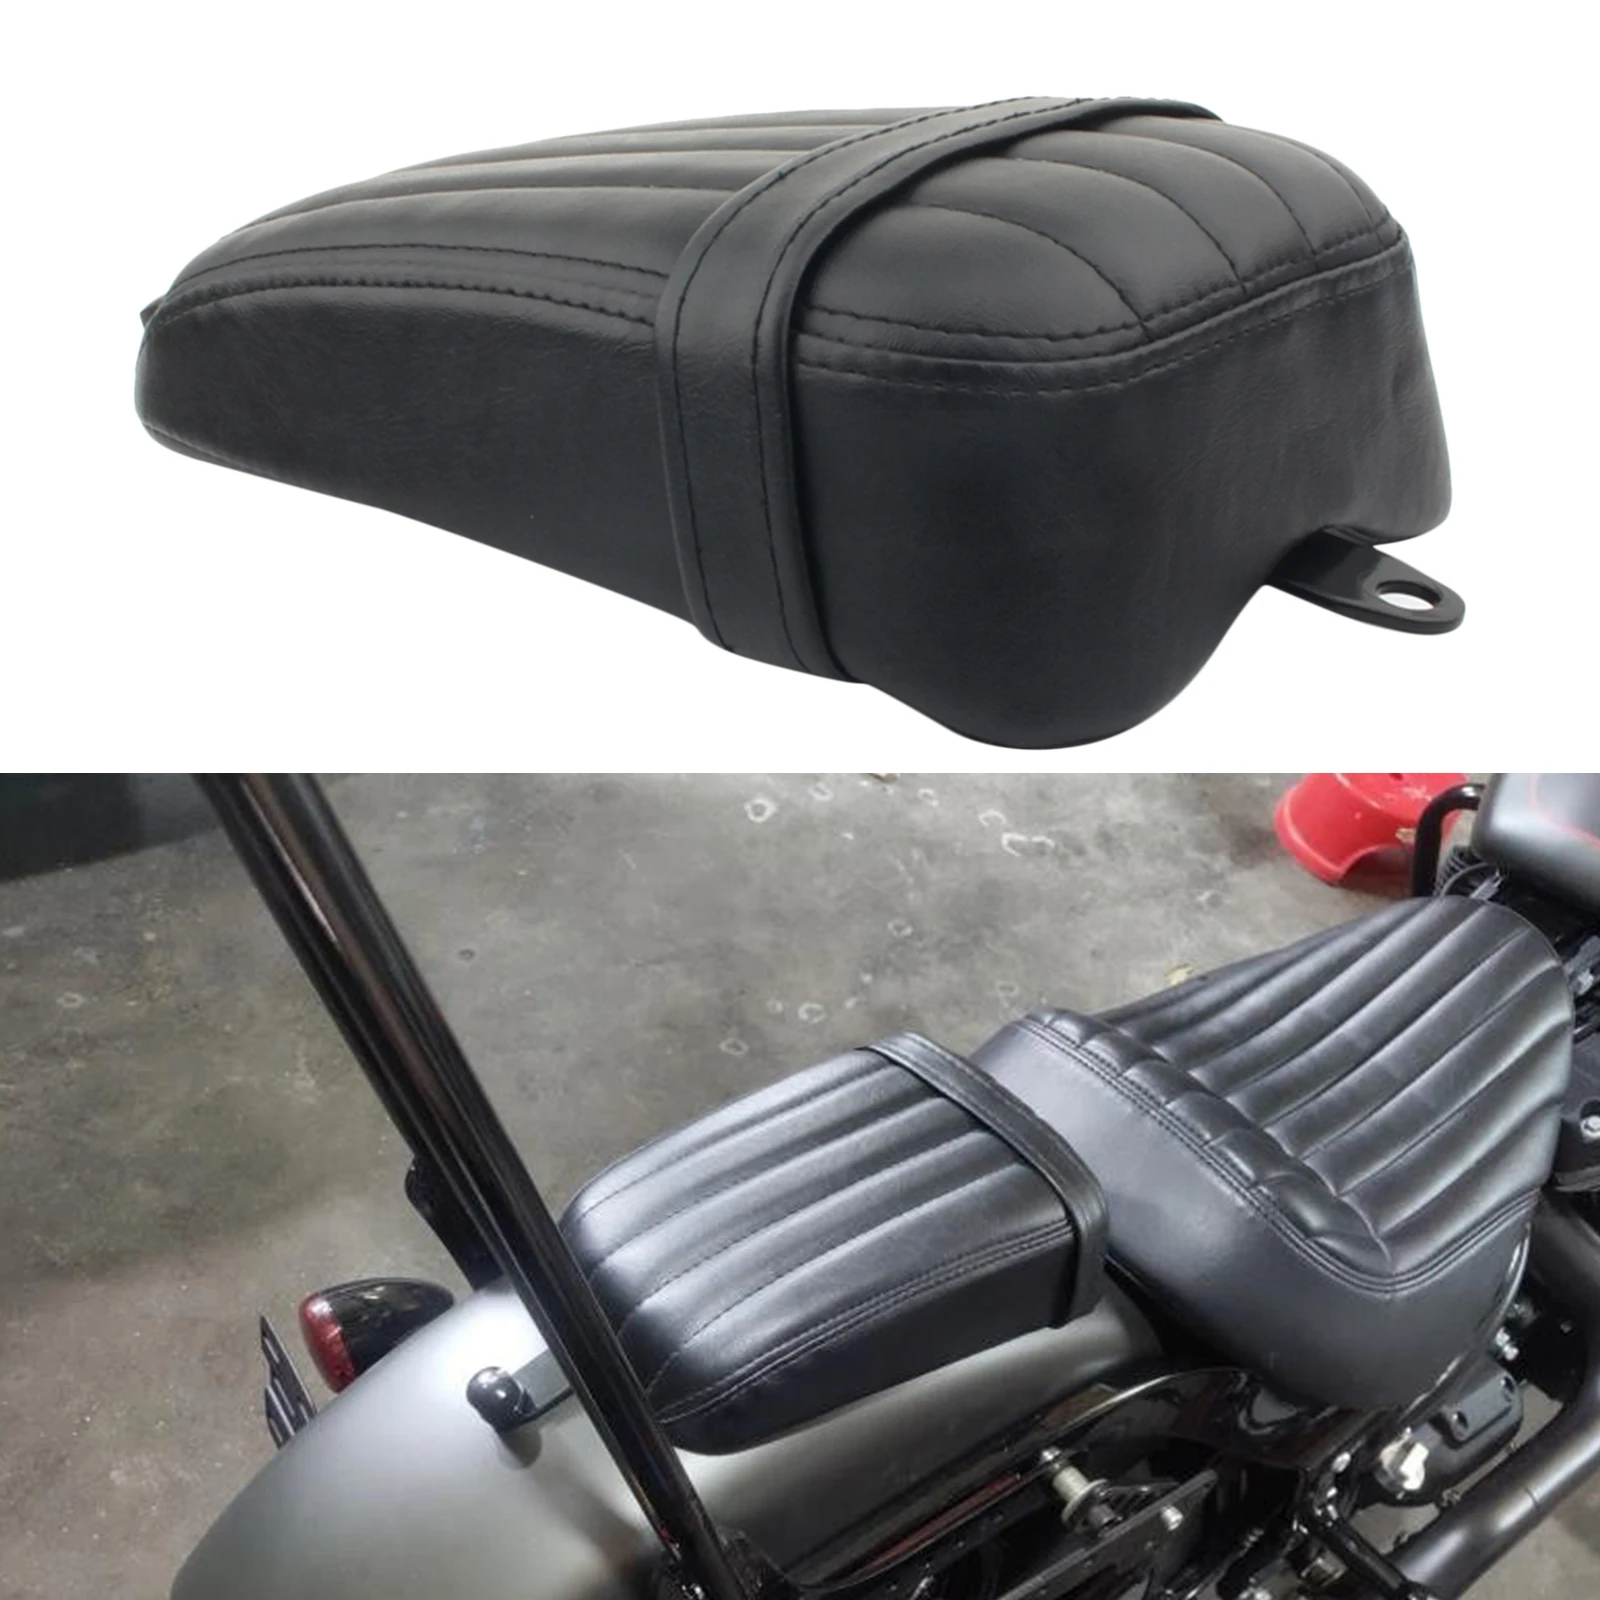 Motorcycle Rear Passenger Cushion Pillion Pad Solo Seat Cushioning Saddle For Harley Street Bob 2018-20 Motorcycle Accessories